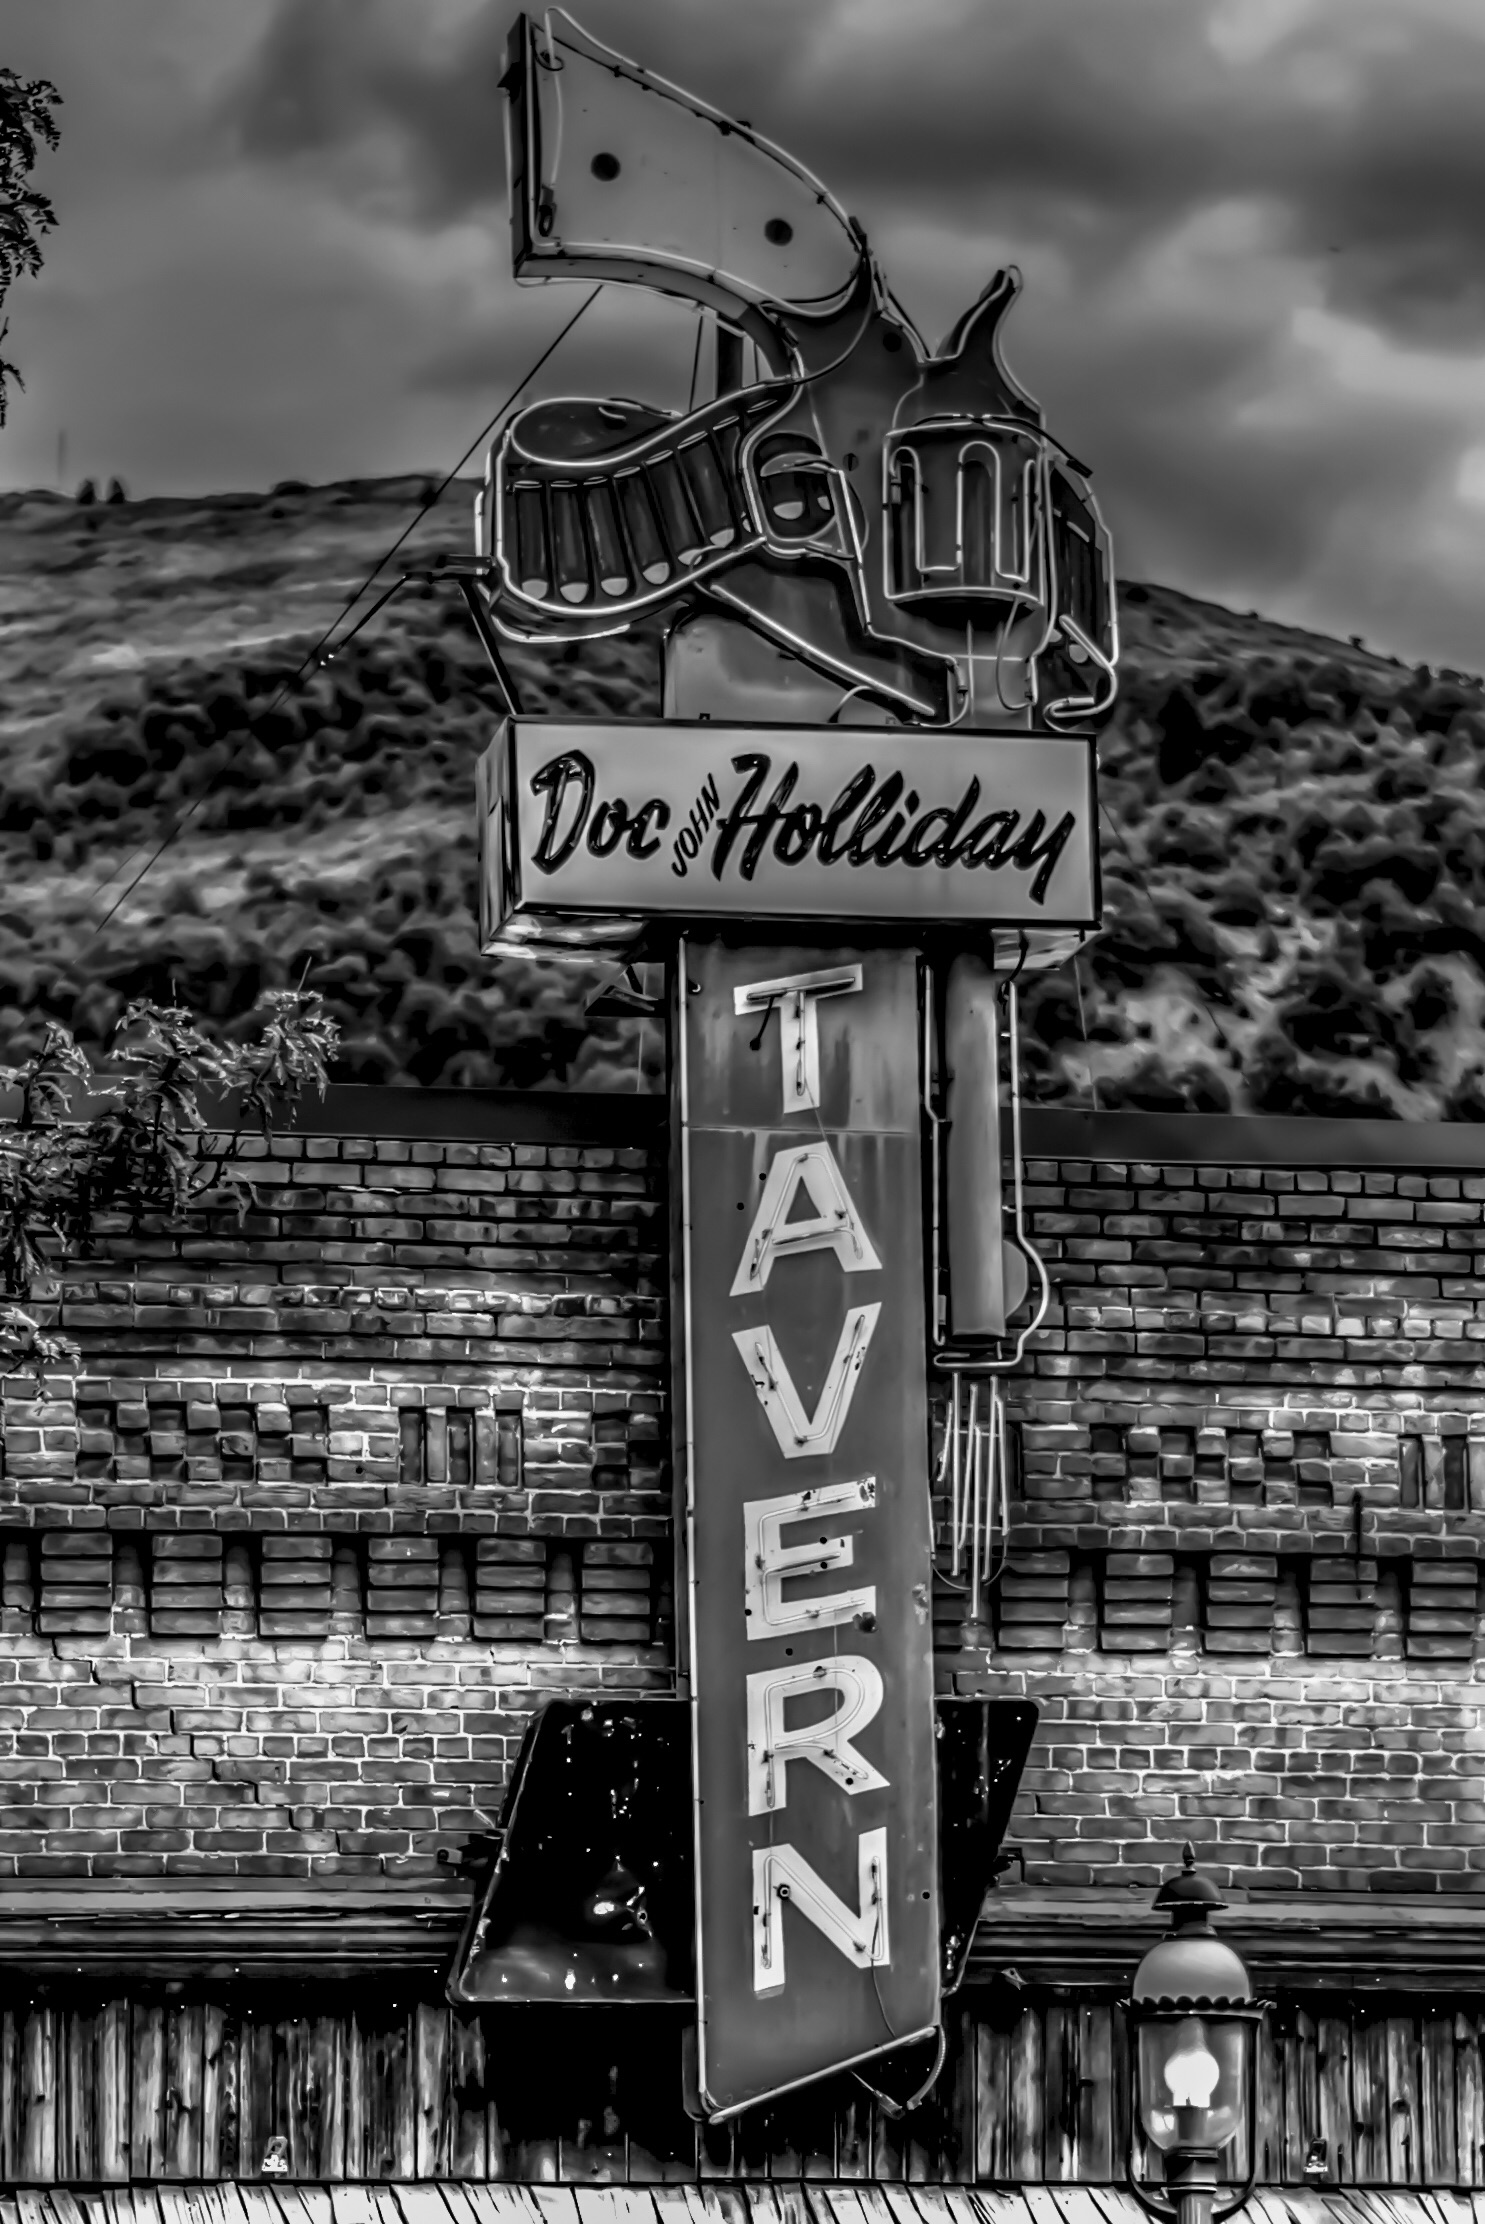 image.jpg Doc Holiday Tavern, Glenwood Springs, CO in Black and White by Dennis Rose